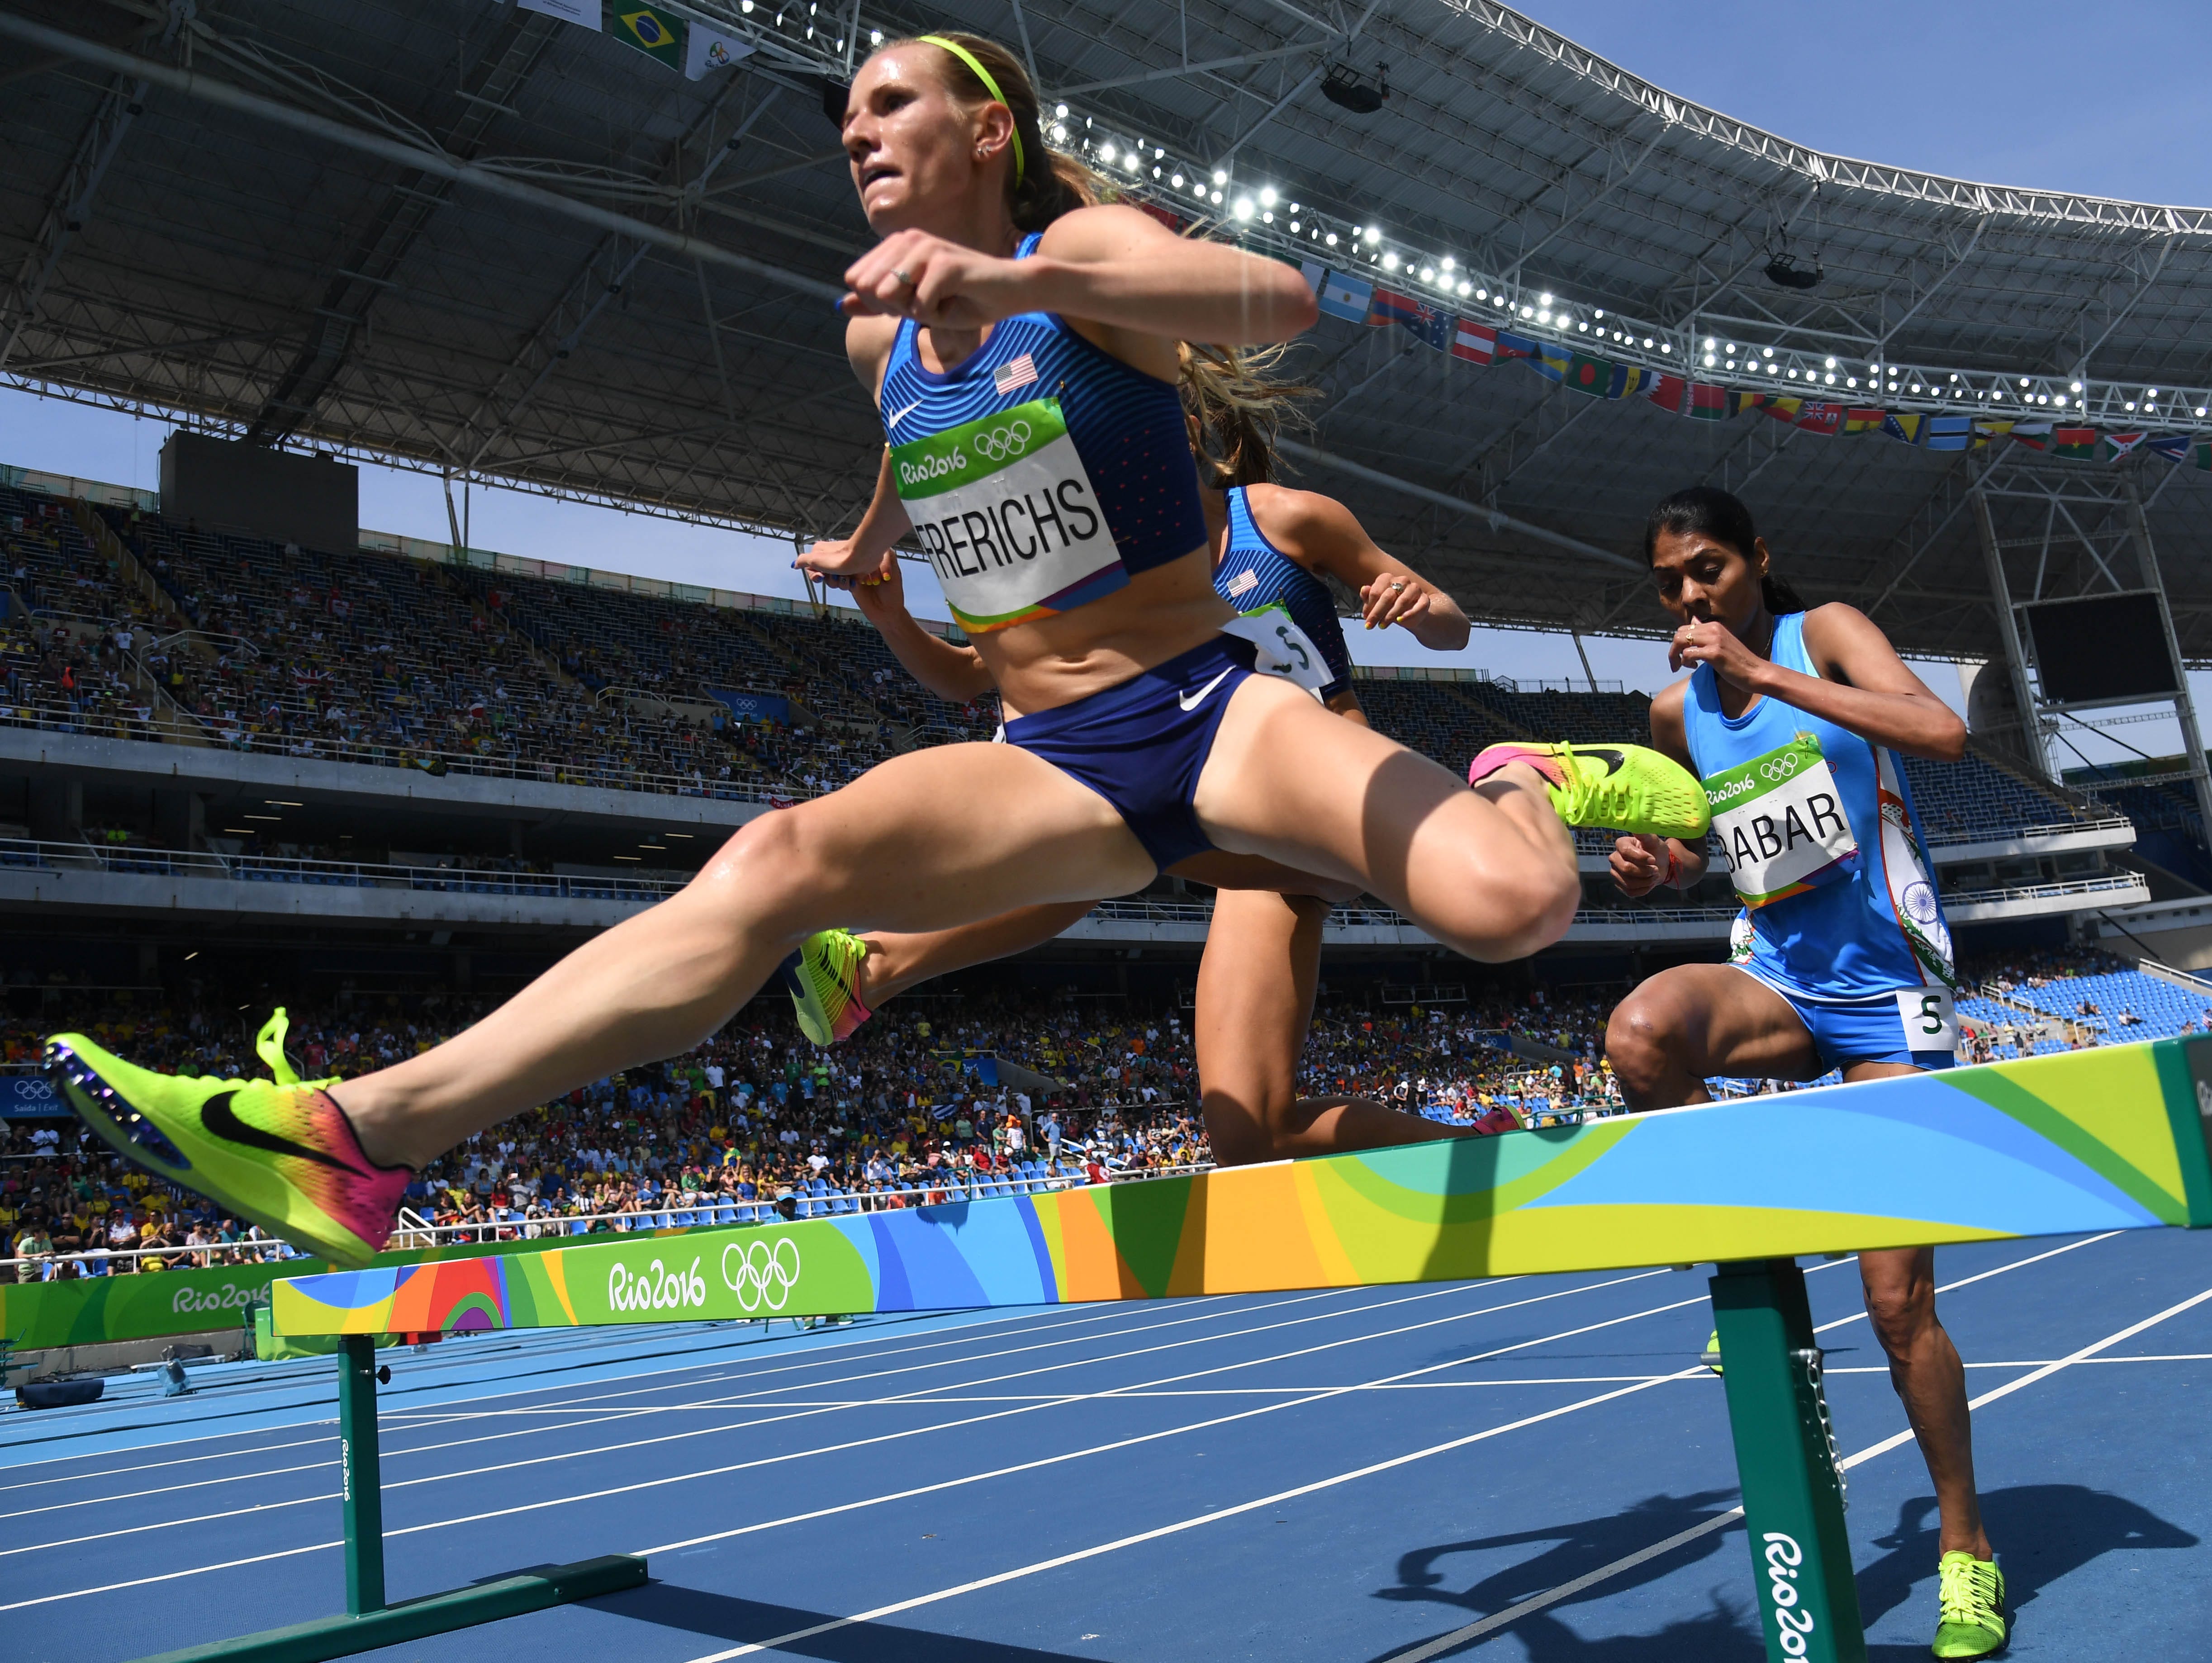 Courtney Frerichs went from Nixa to the finals of the Olympic steeplechase competition.